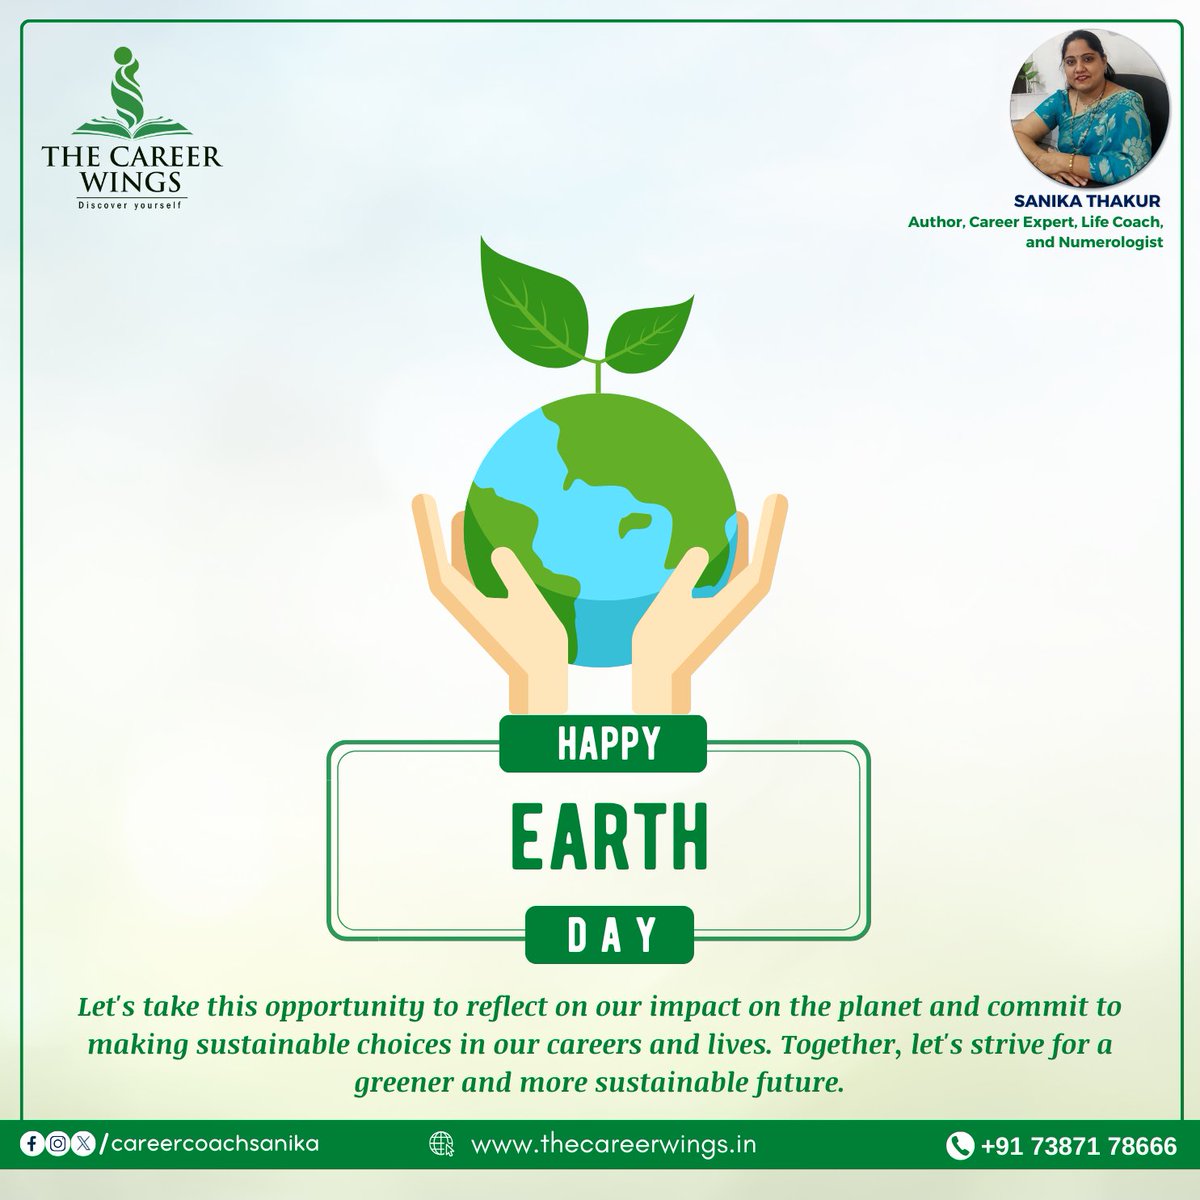 Happy Earth Day! Let's be mindful of our impact on the planet and strive to live in harmony with nature.

#earthday #happyearthday #earthday2024 #22april #earth #saveearth #careercoach #maharashtra #careerhelp #careercounseling #पुणे #Trends #careertrends #trending #pune